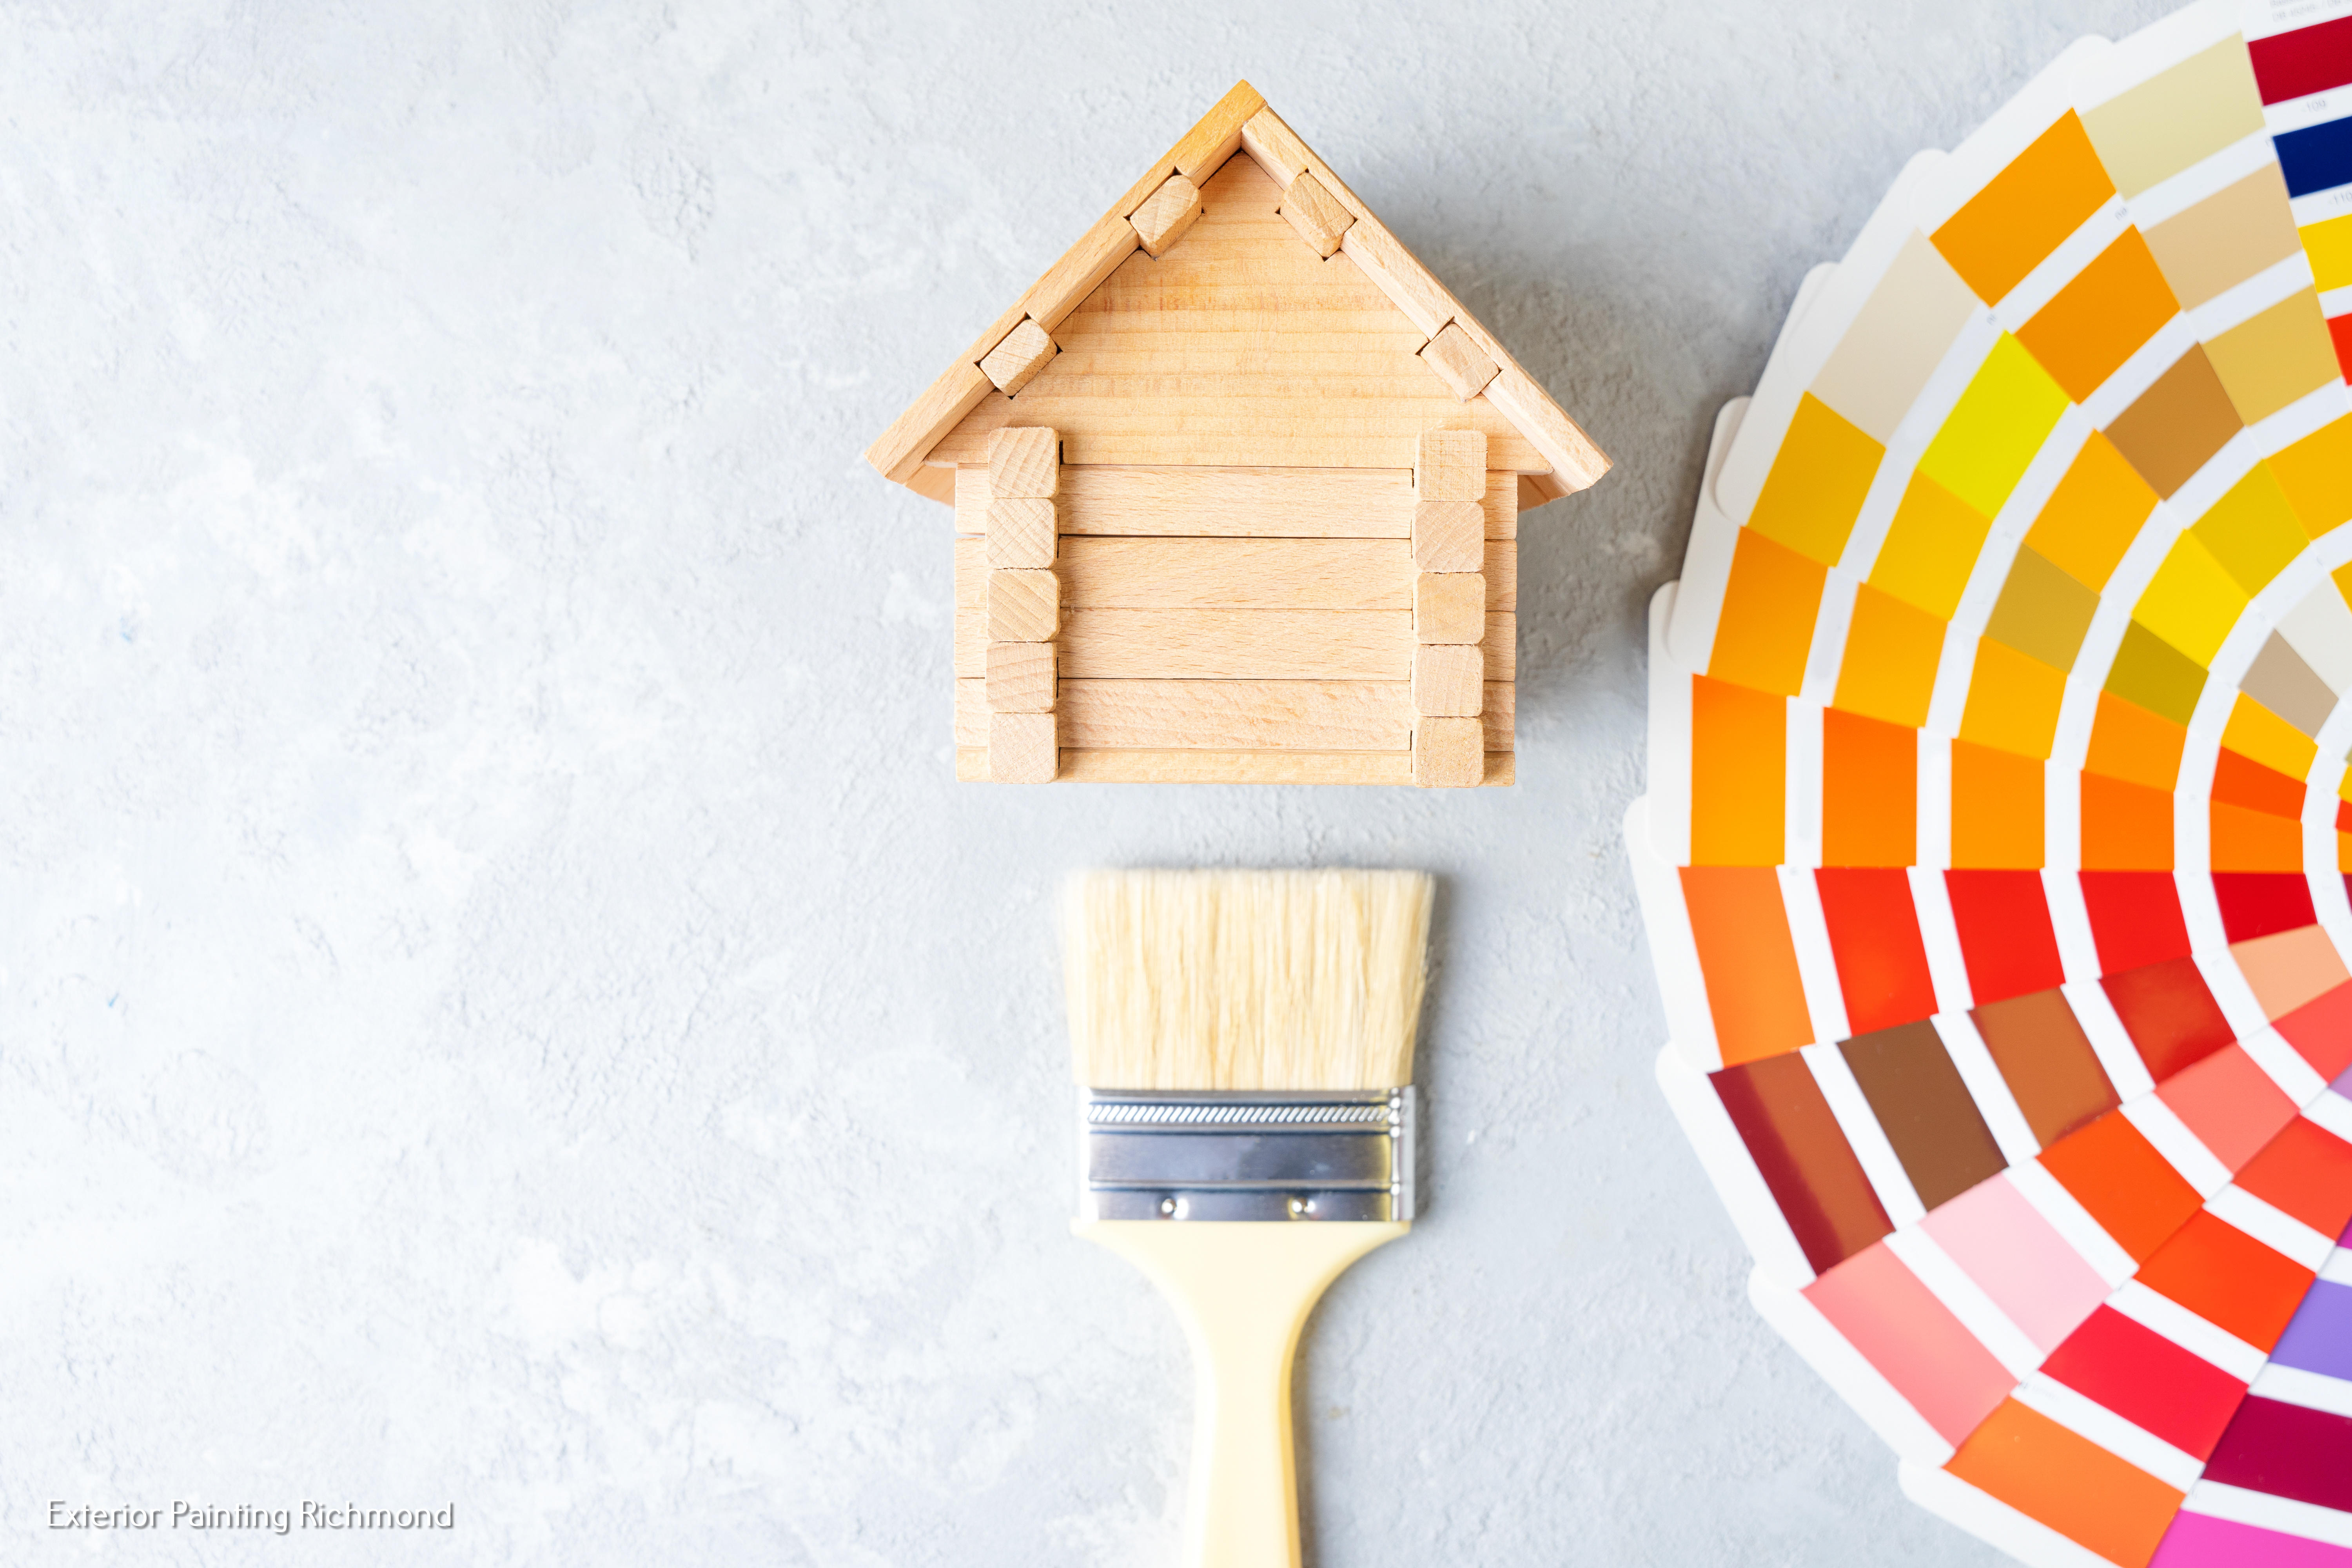 Fix & Paint Explains Why Working with Professional Painters is an Excellent Idea